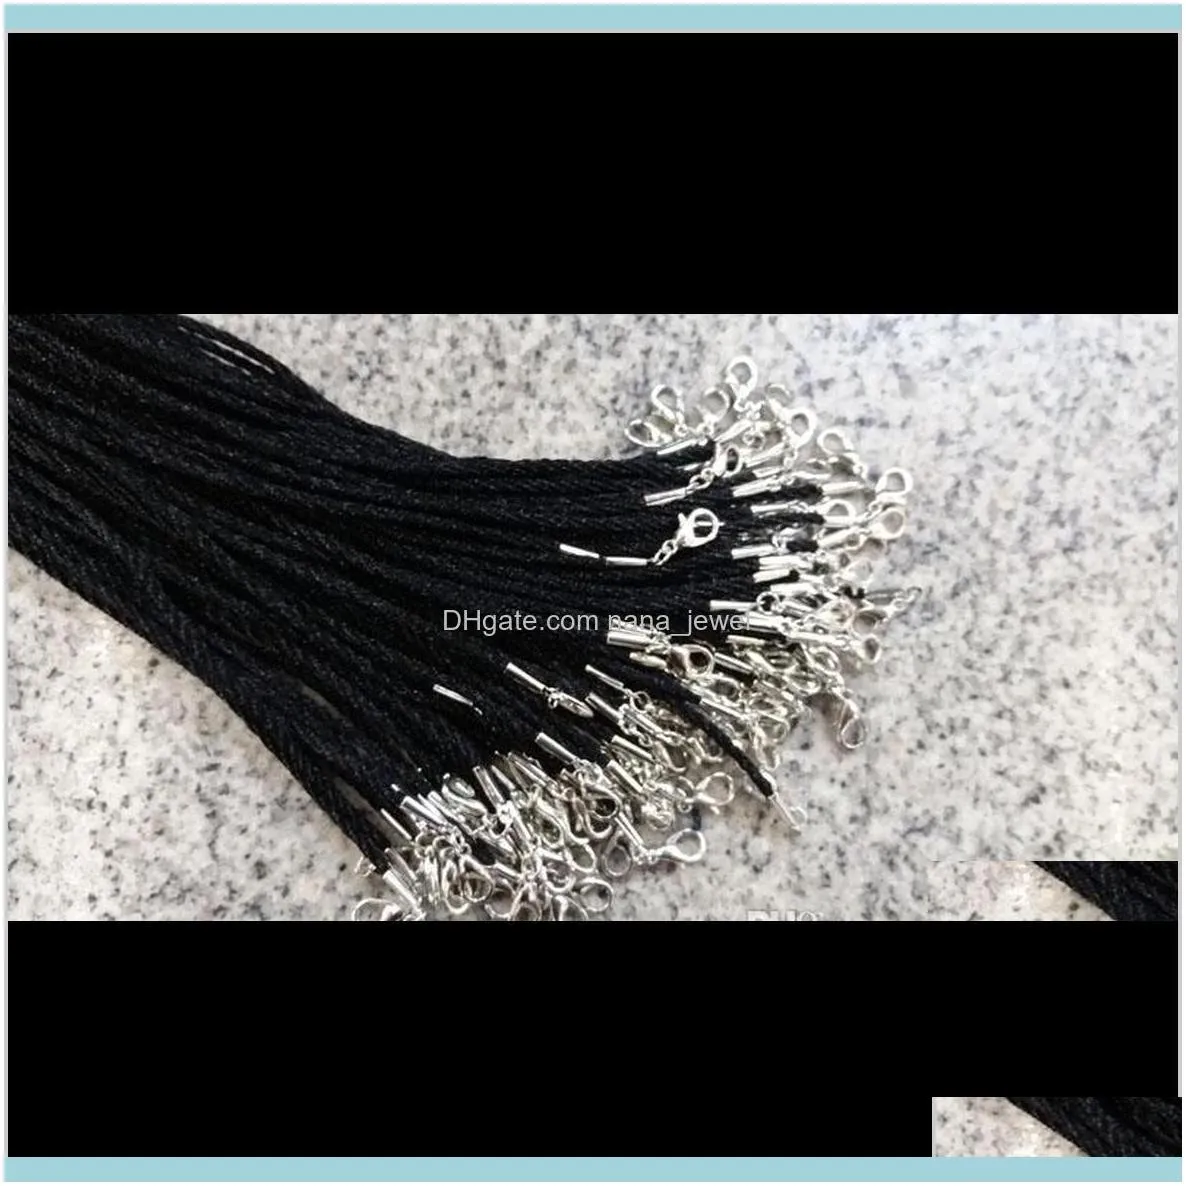 100Pcs Black Satin Silk Necklace Cord 2.0Mm/18``With 2`` Extension Chain Lead&Nickel